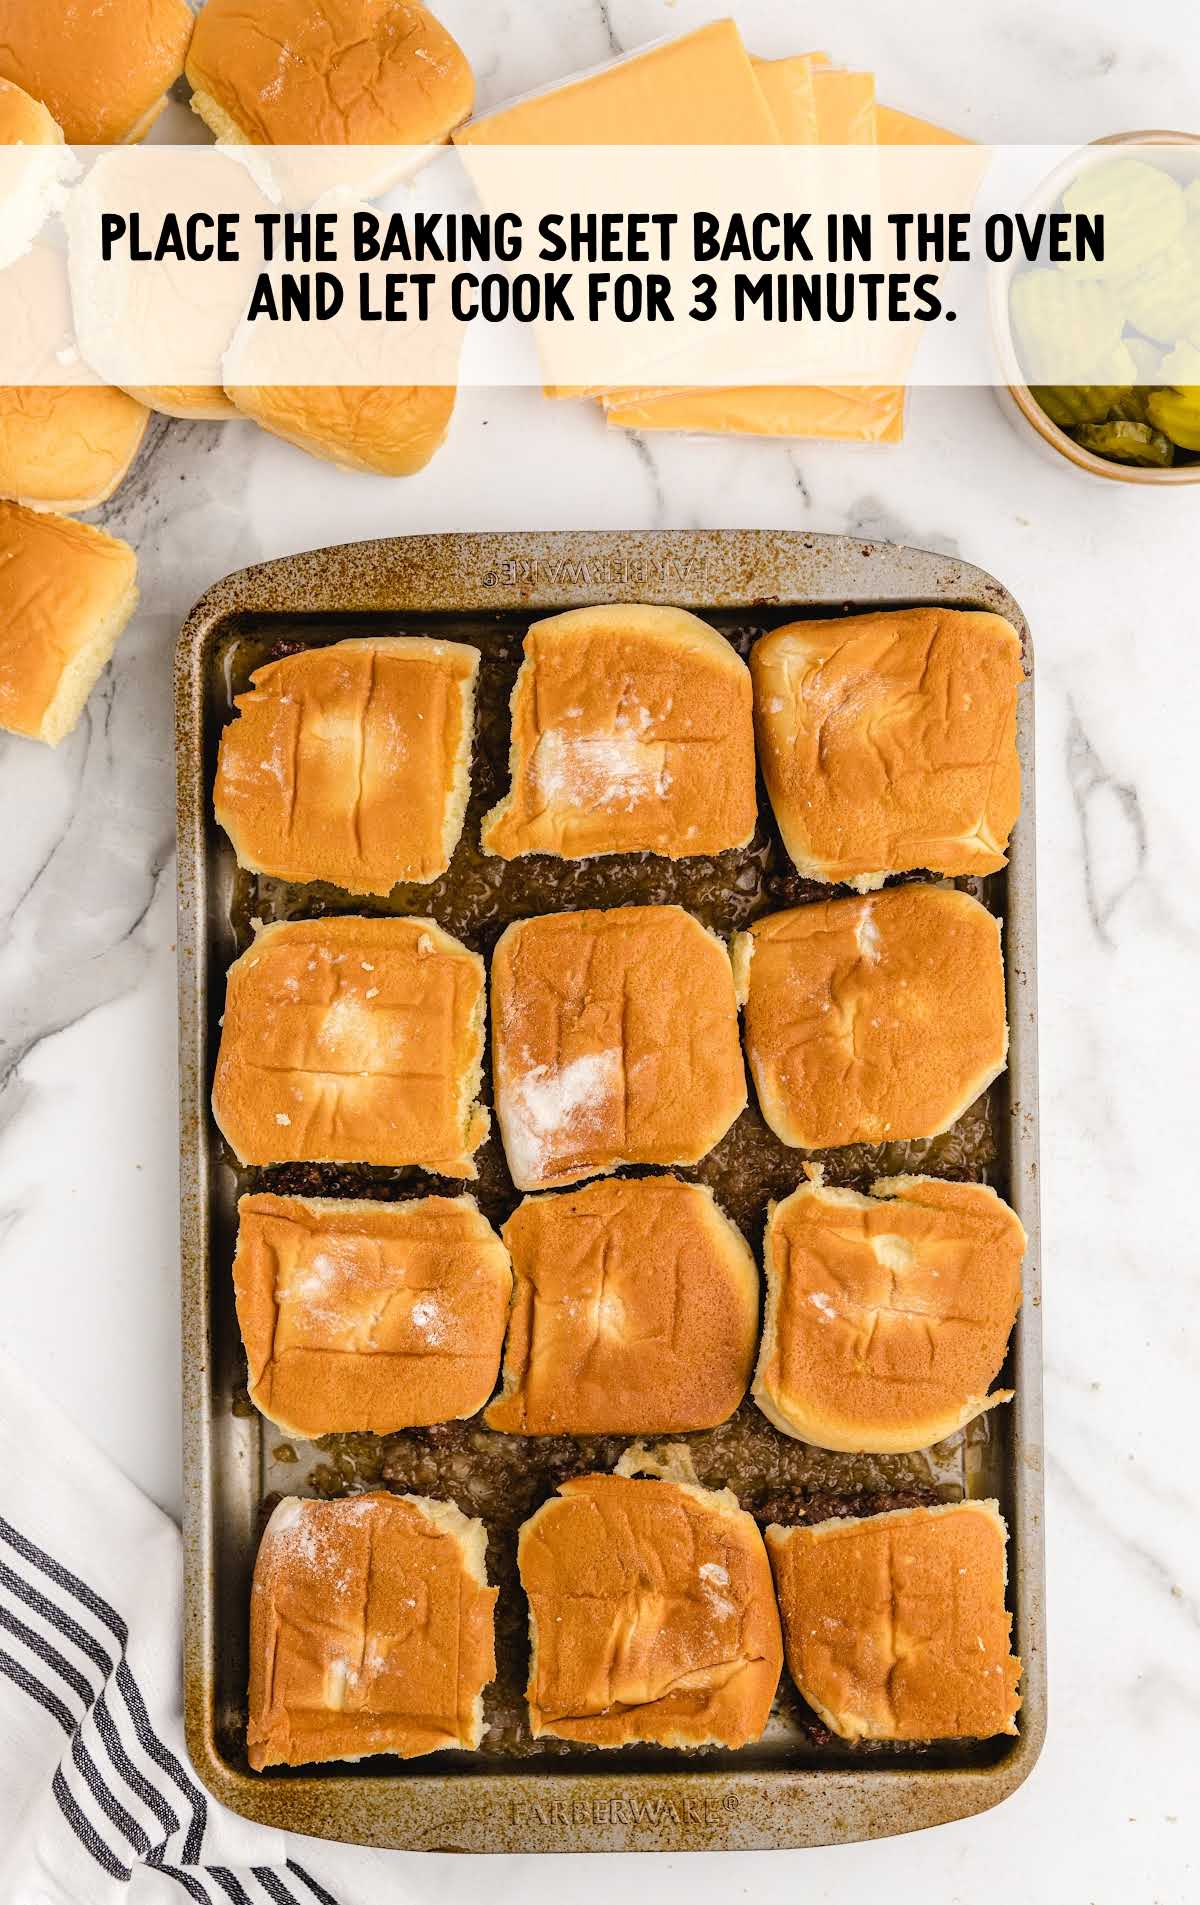 ground beef mixture topped with buns after being baked in a baking sheet